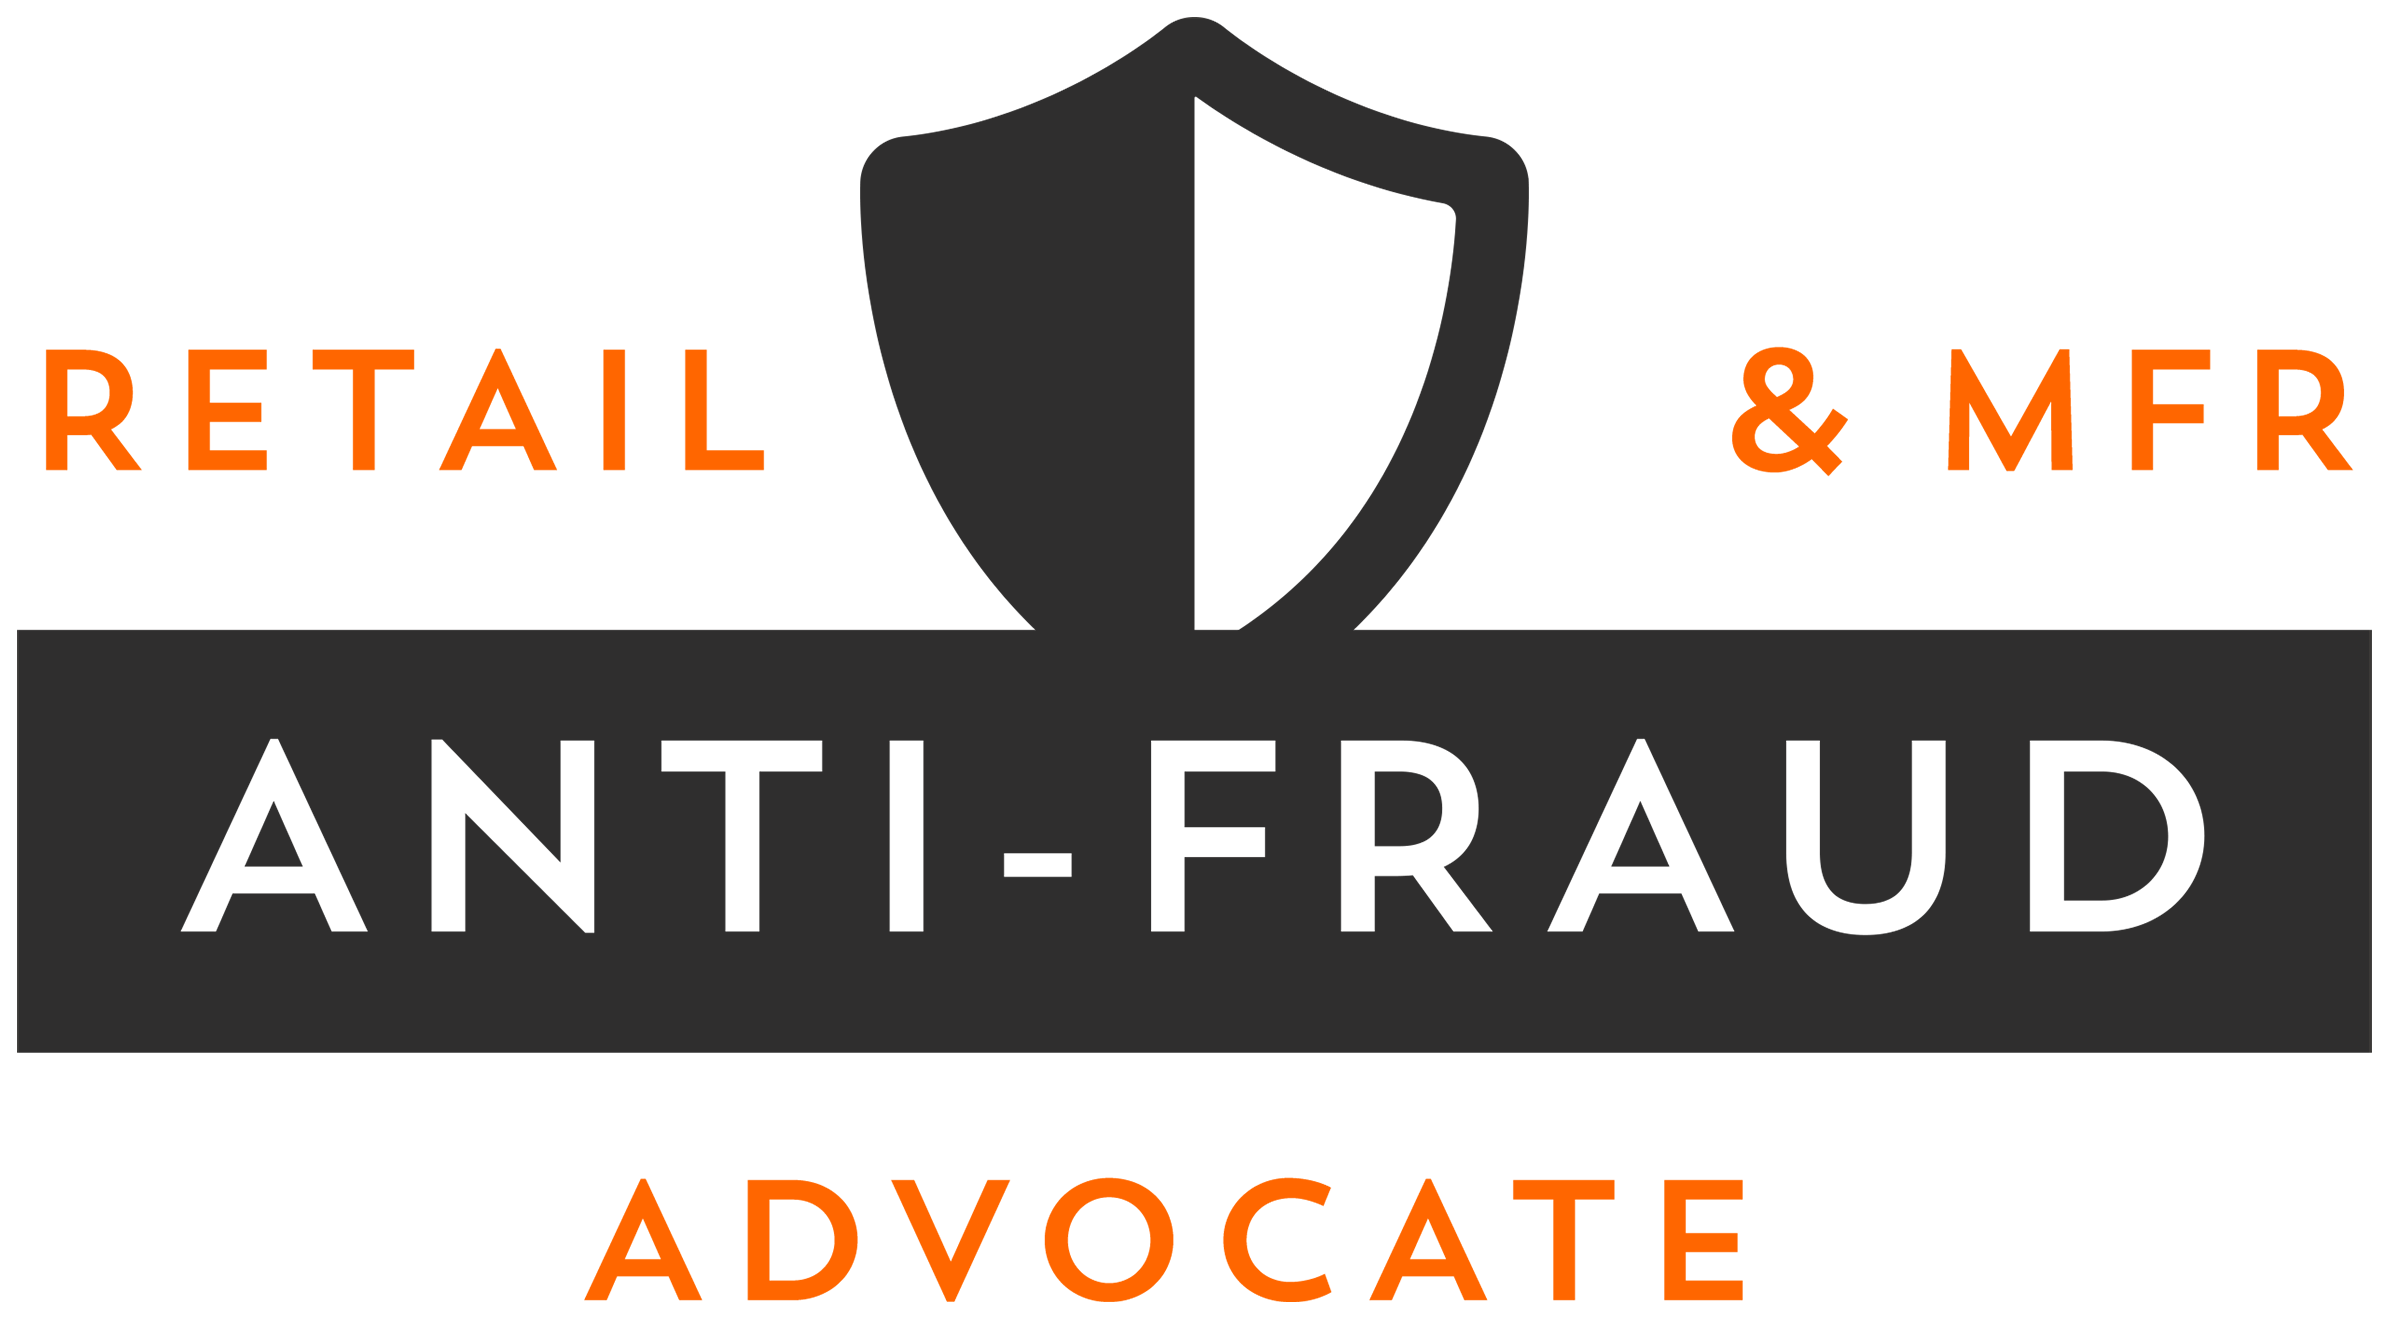 coupon fraud protection and settlements